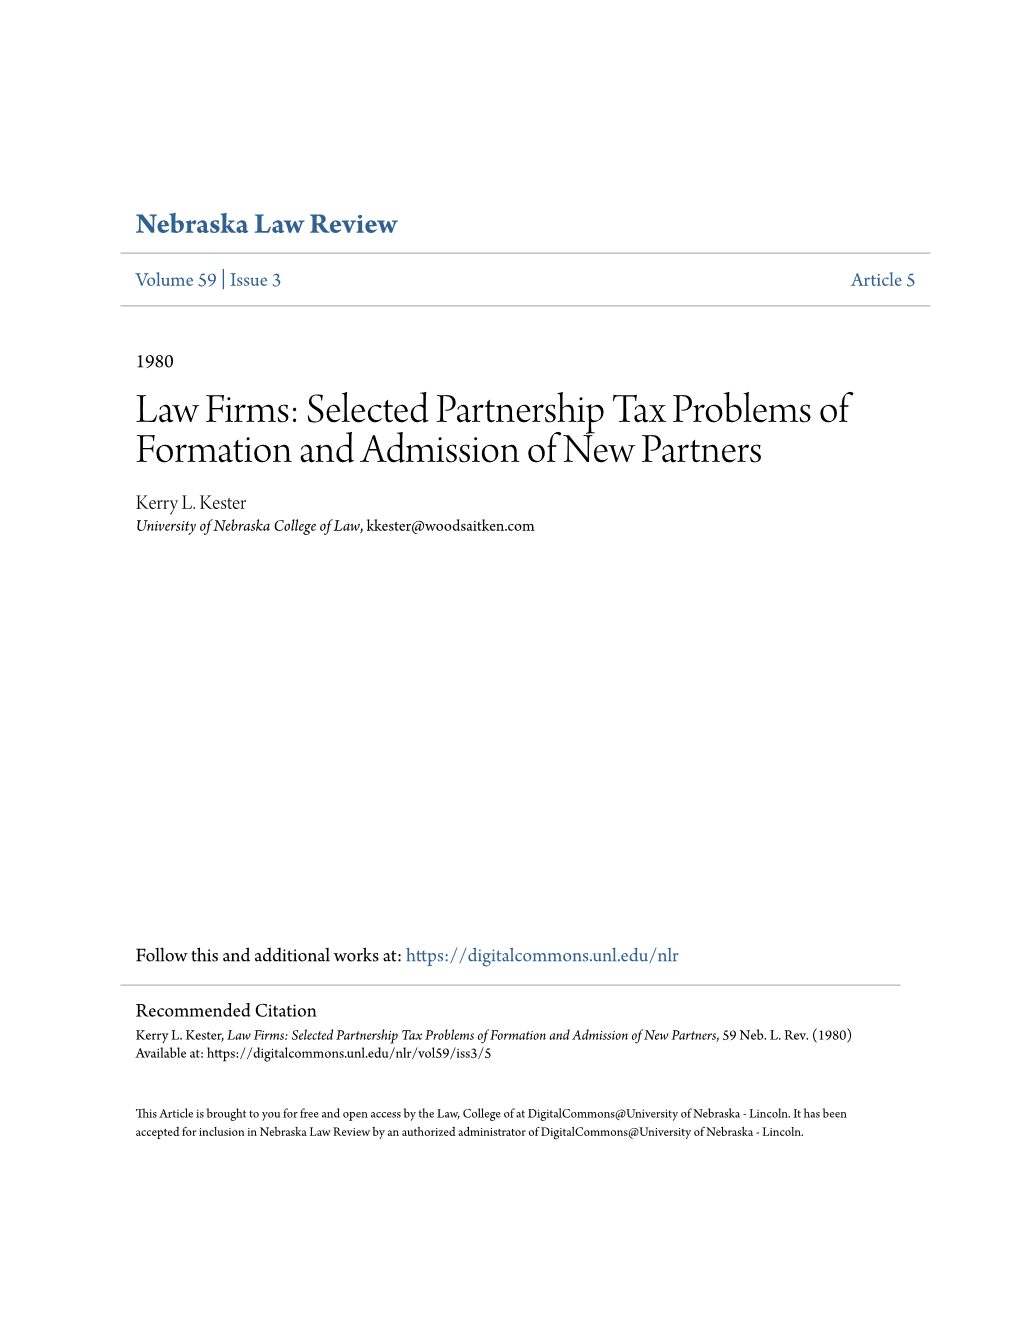 Law Firms: Selected Partnership Tax Problems of Formation and Admission of New Partners Kerry L